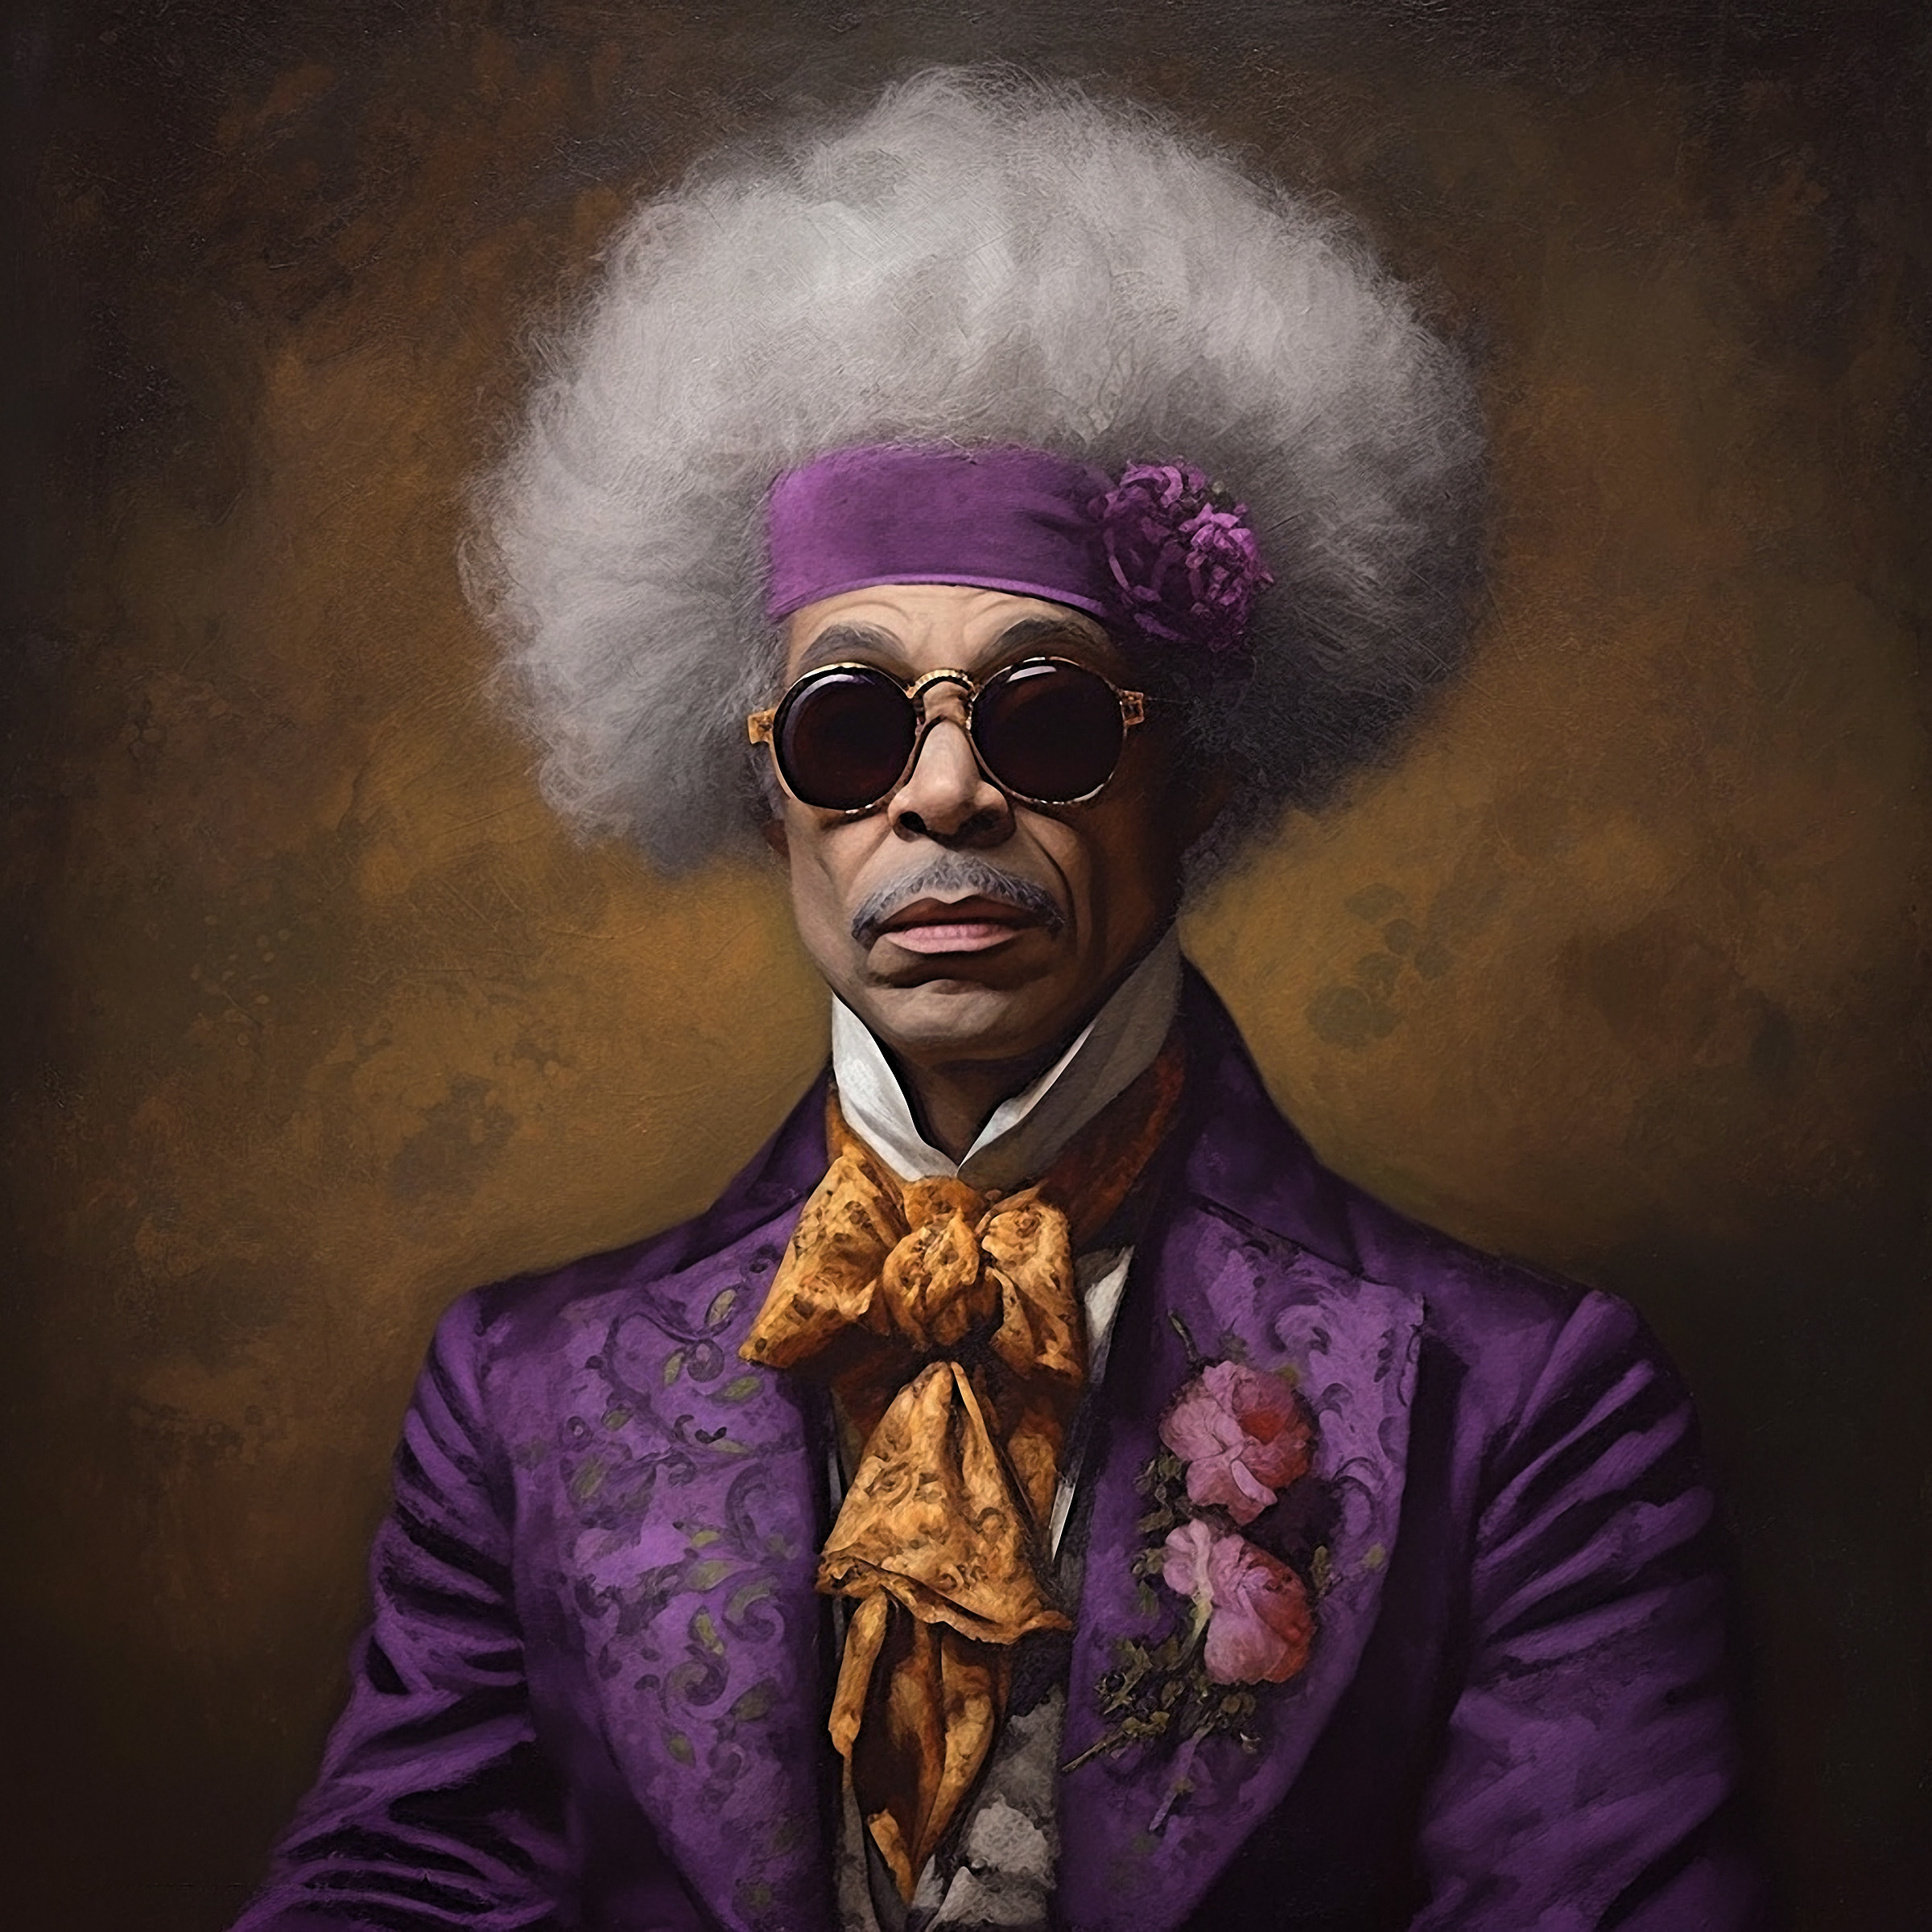 Prince imagined as an older person